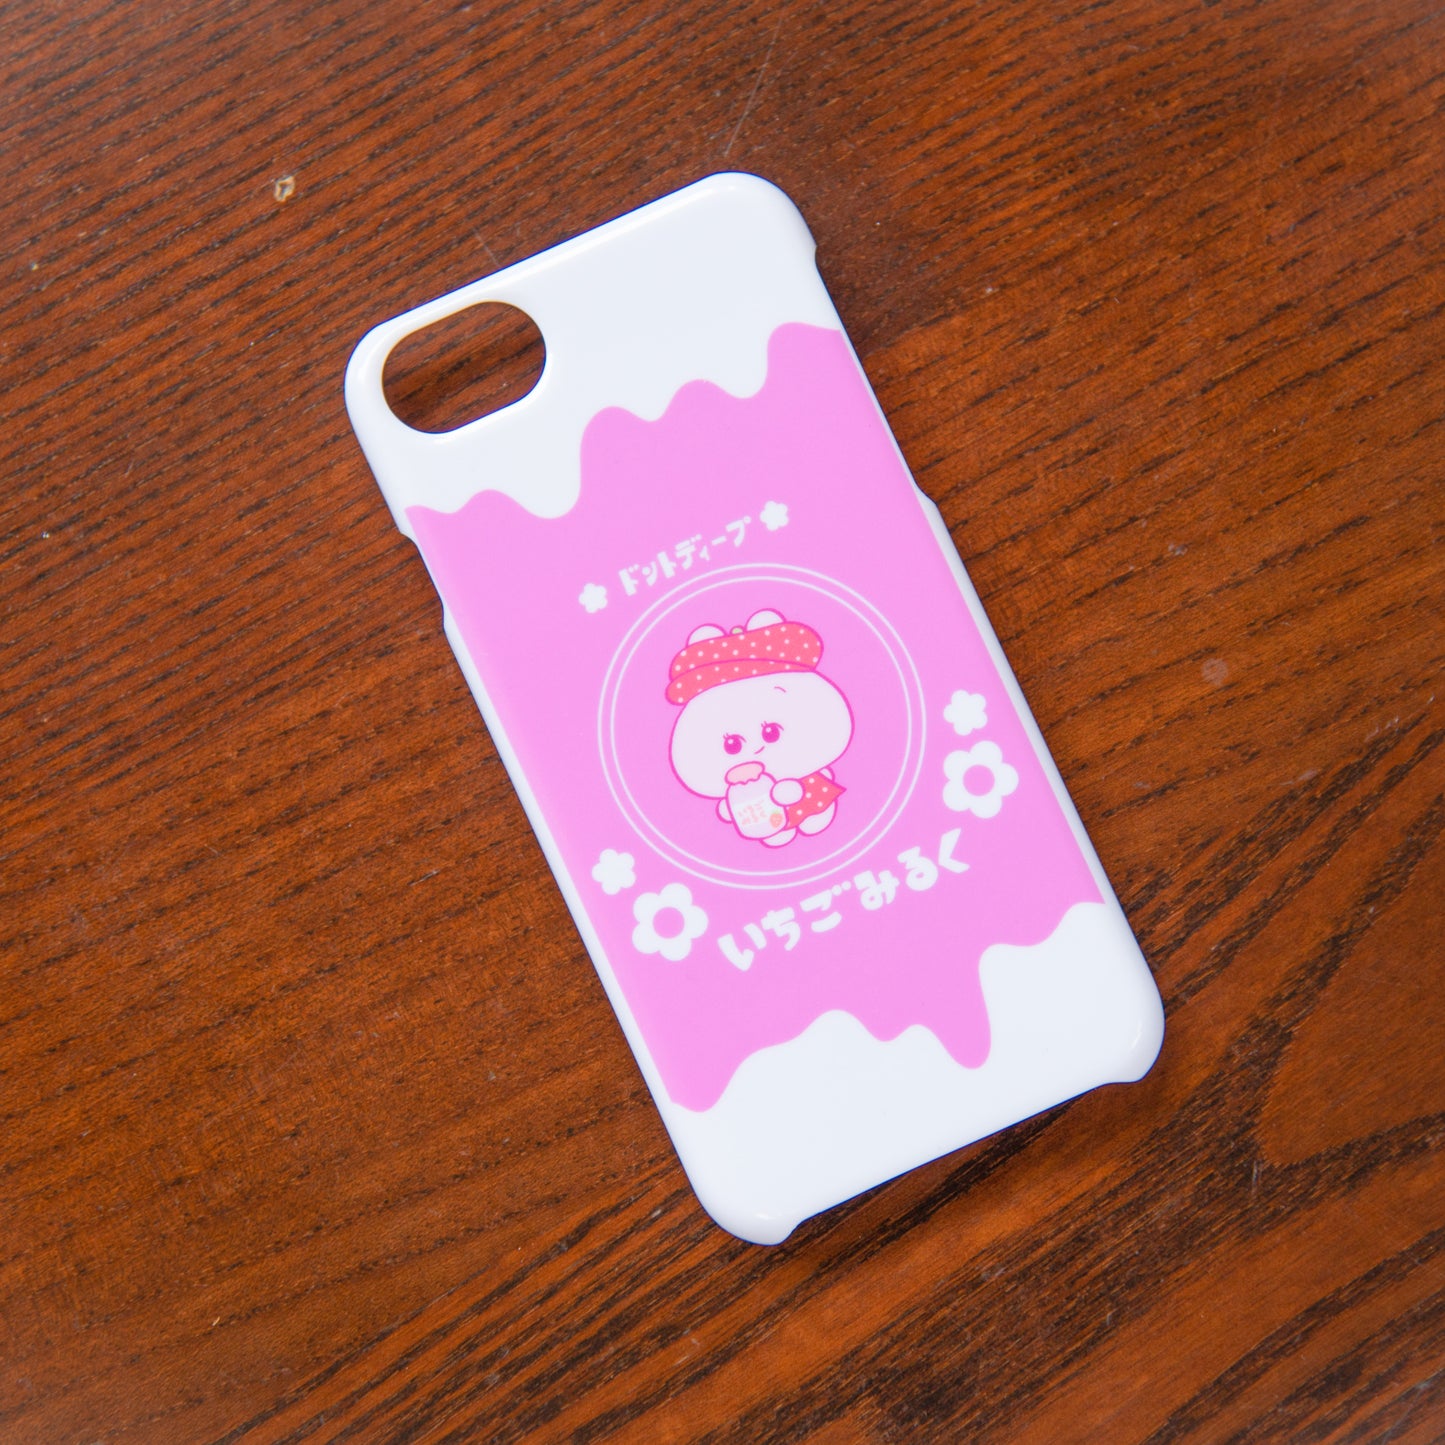 [Asamimi-chan] Smartphone case compatible with almost all models (Ichigo Milk) Docomo② [Made to order]